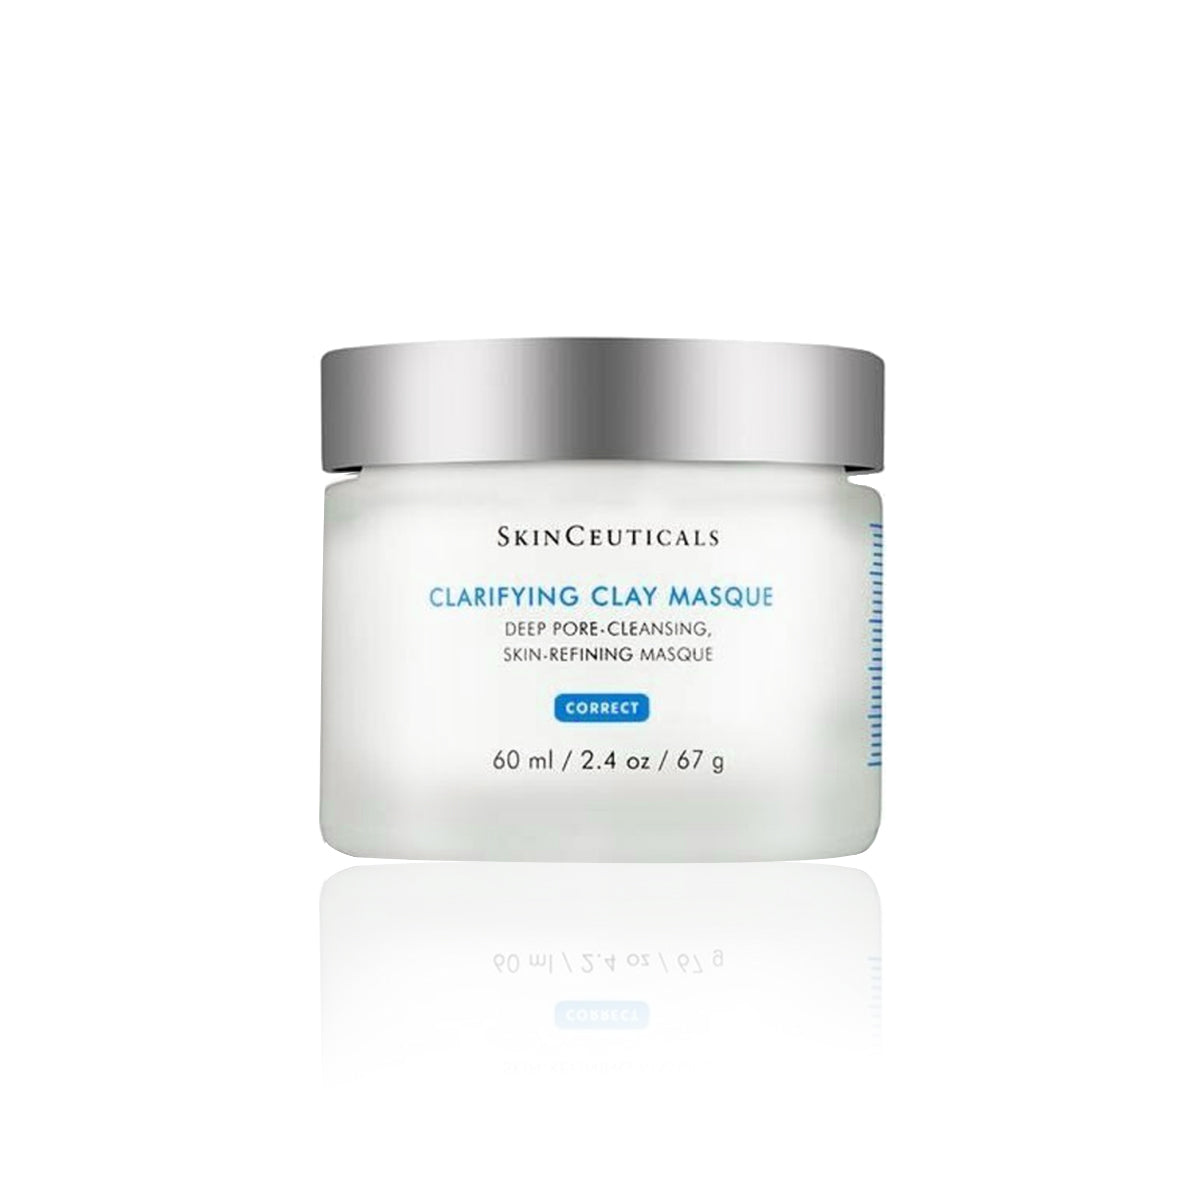 SkinCeuticals Deep Purifying Mask | CLARIFYING CLAY MASQUE 60g